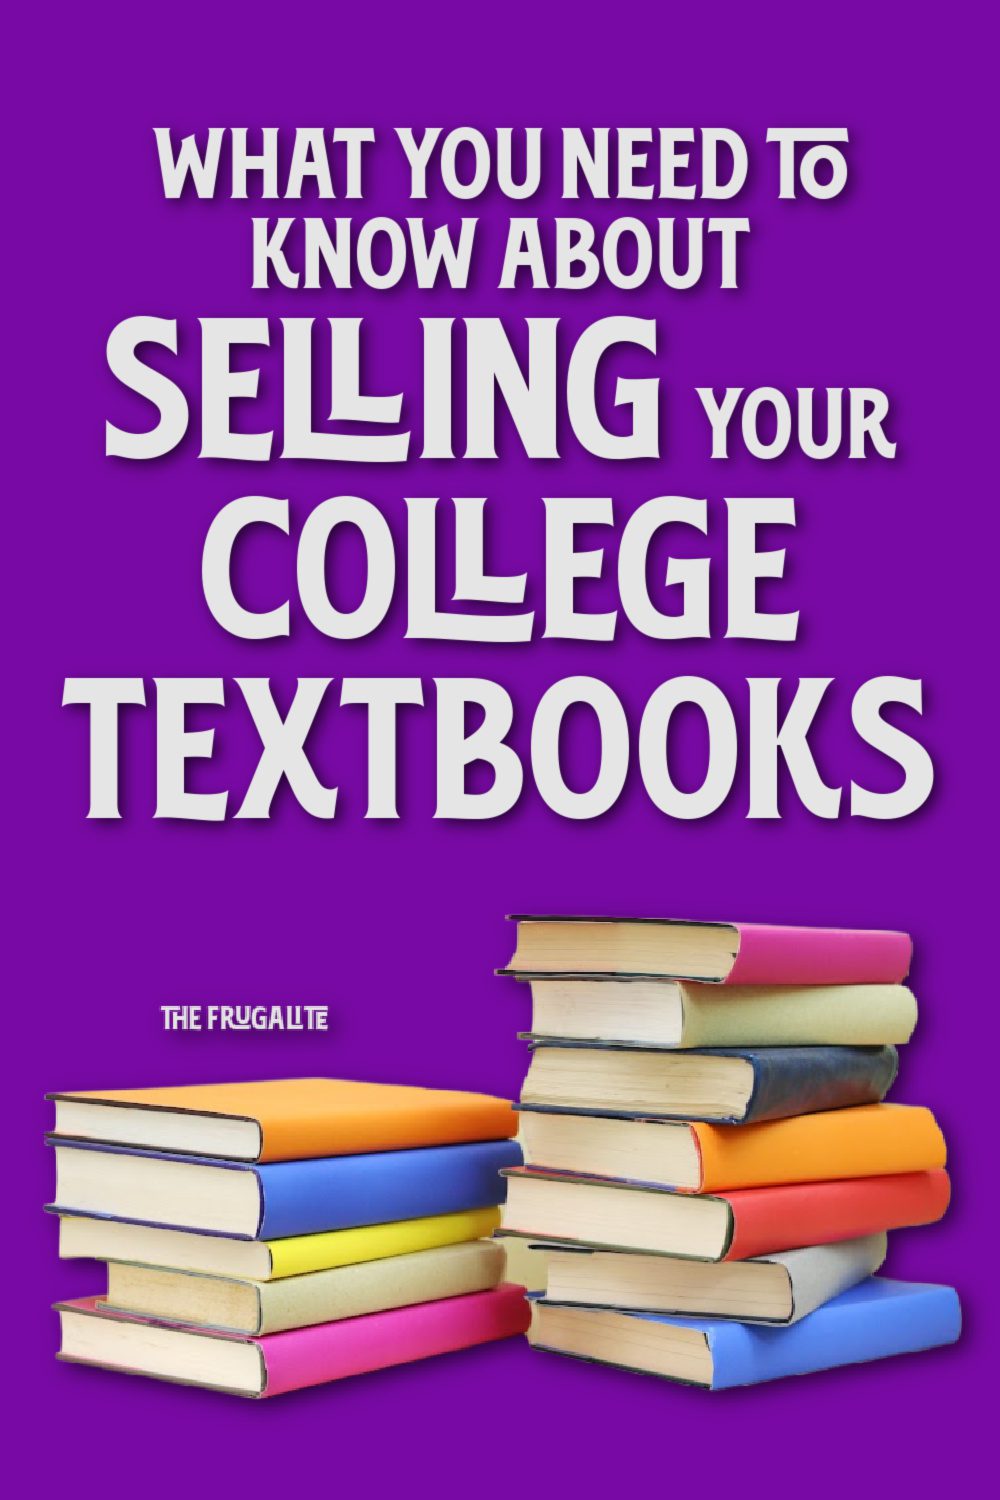 What You Need to Know About Selling College Textbooks